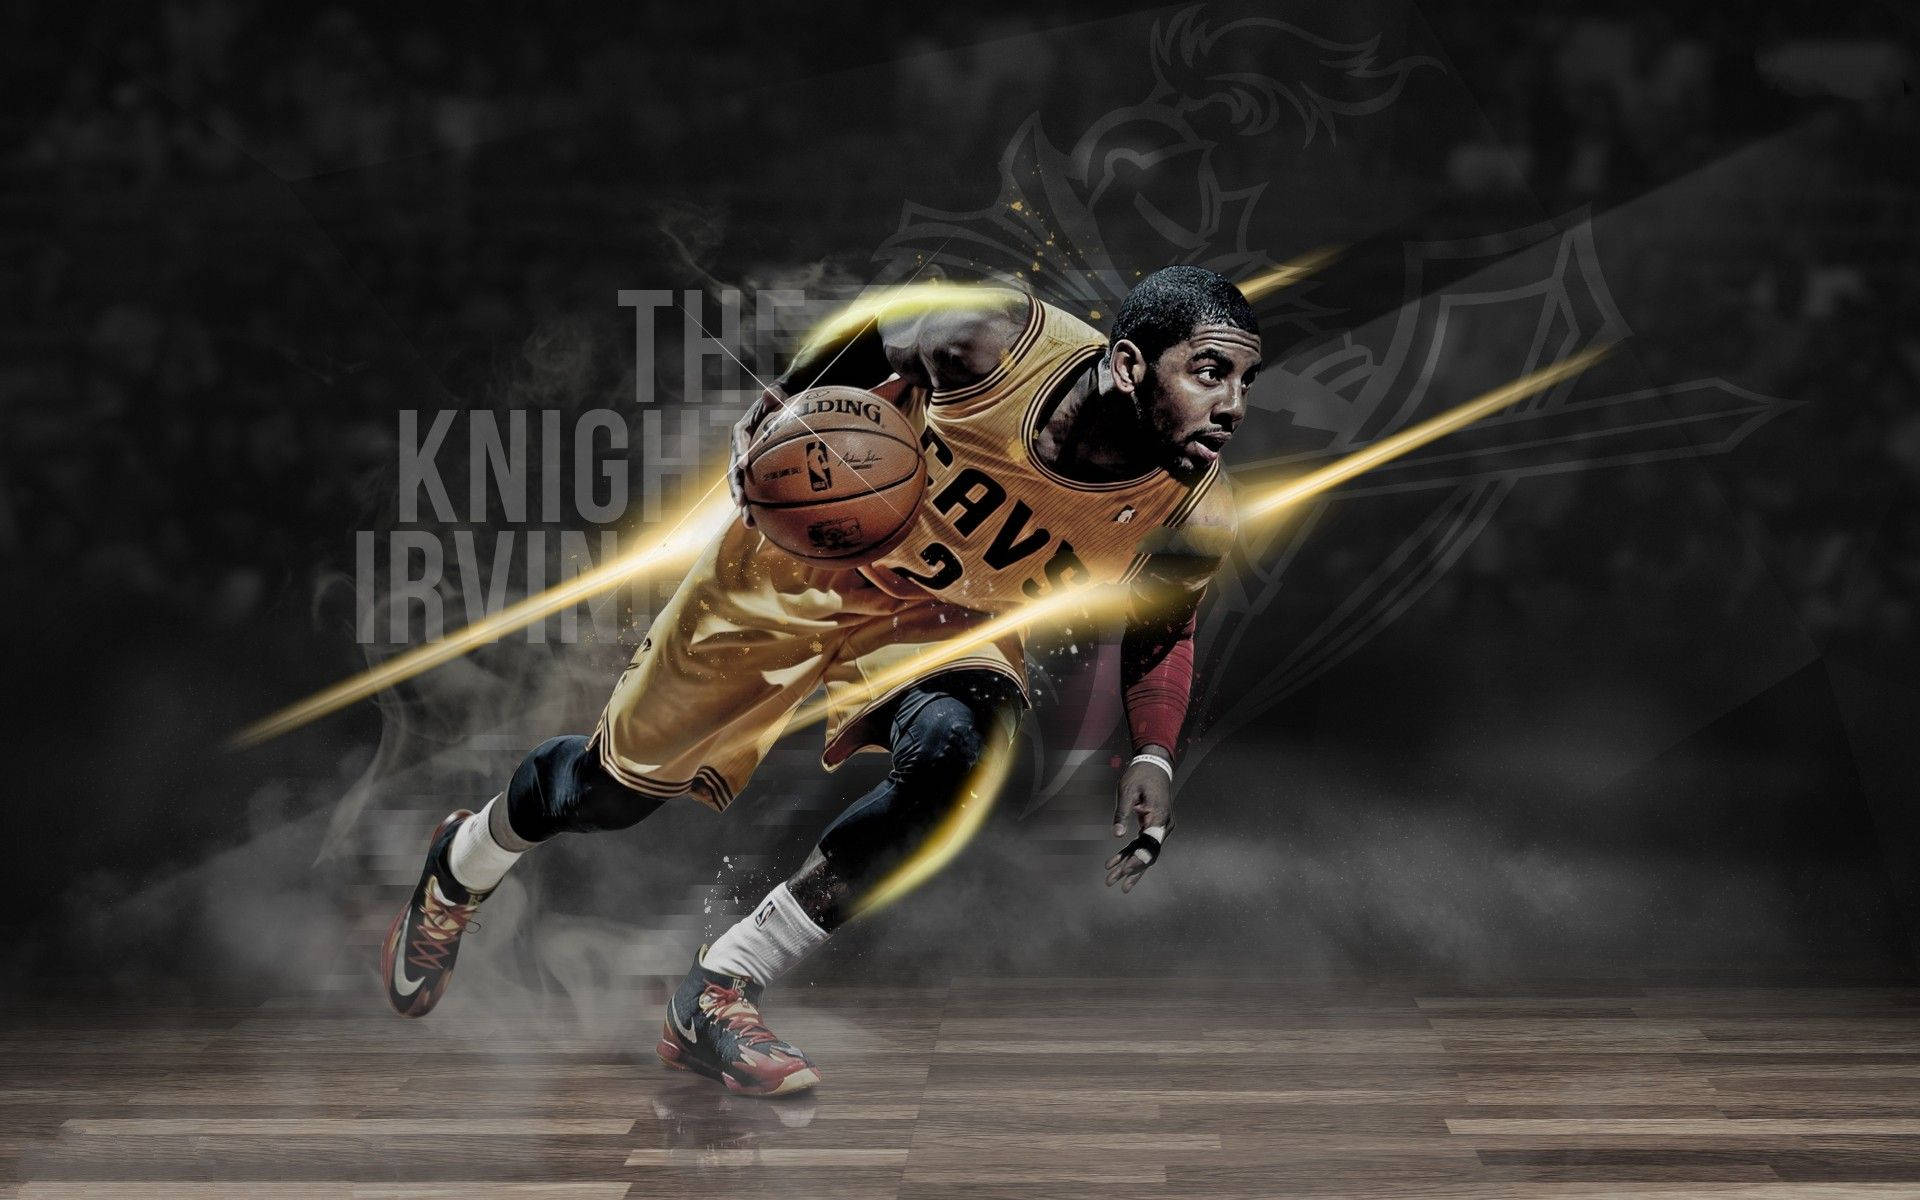 The Knight Kyrie Irving Wallpaper